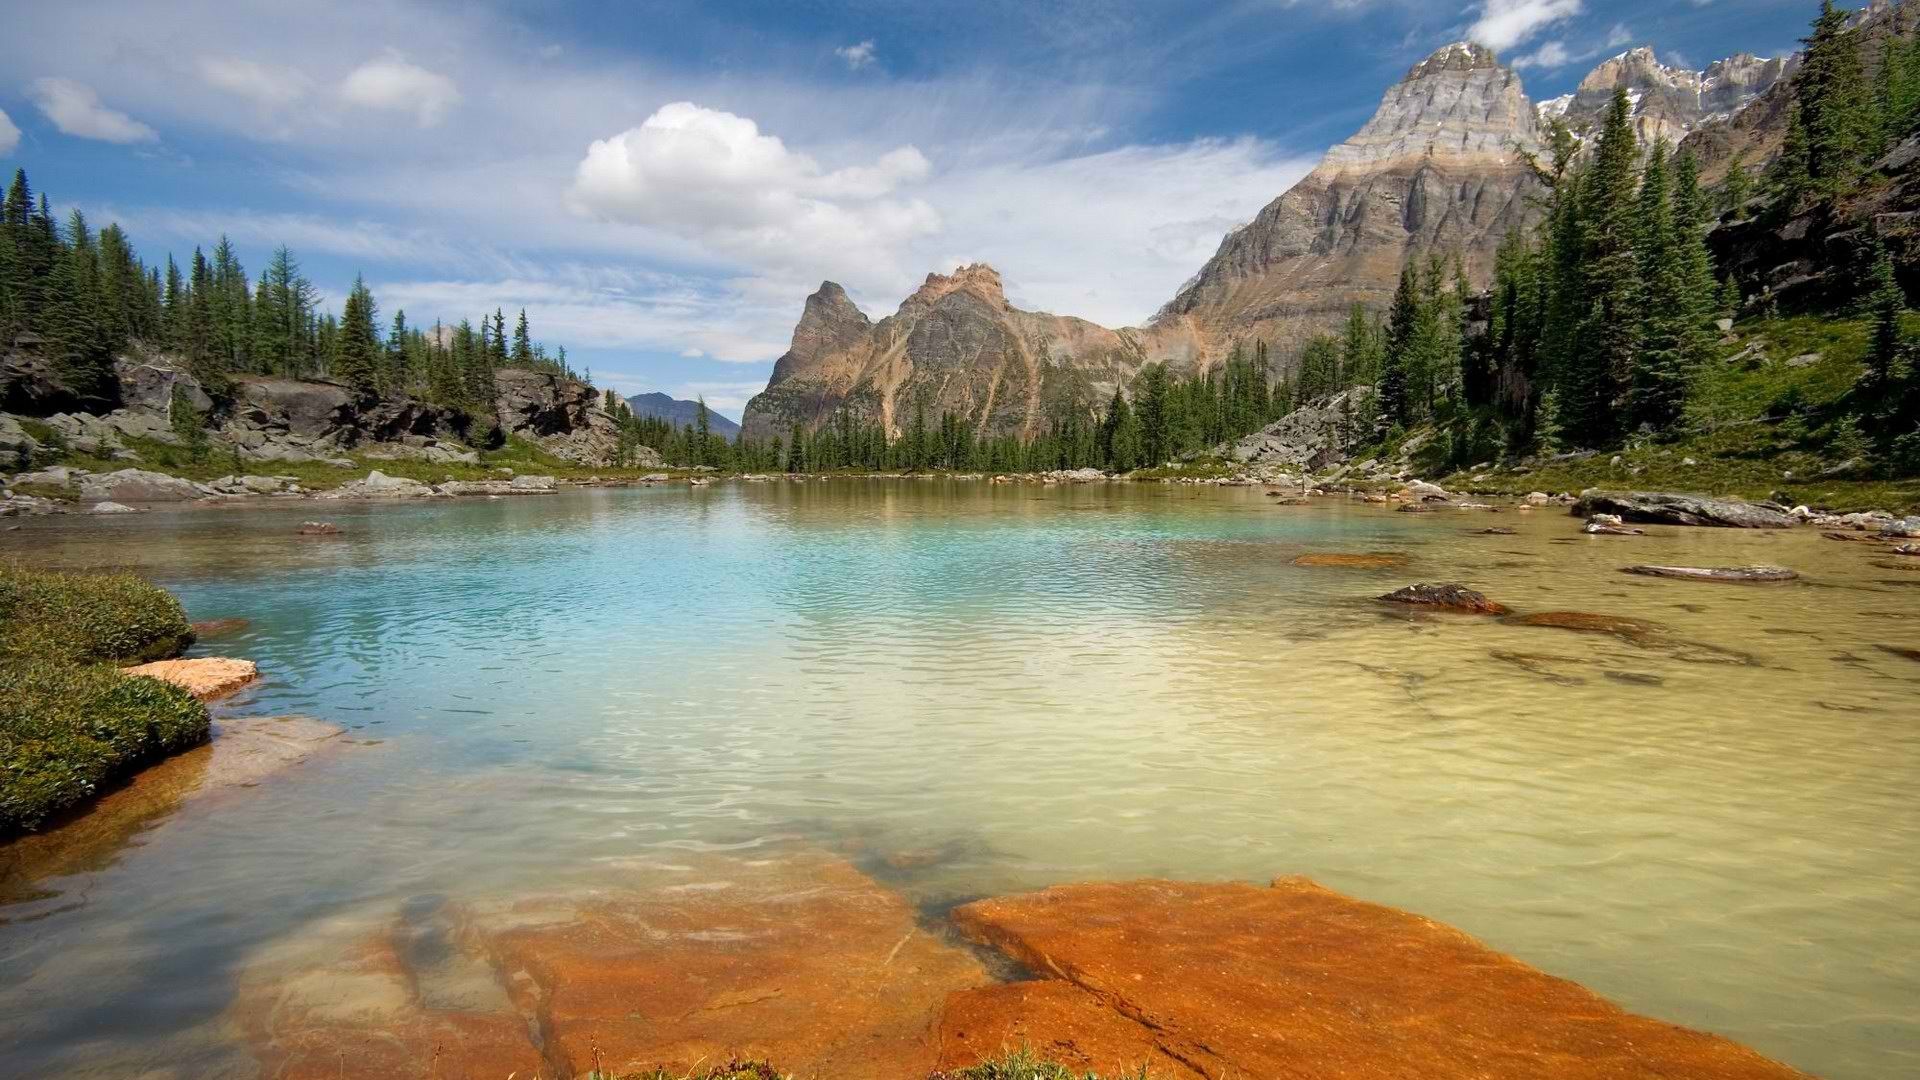 430 Canada HD Wallpapers [1920x1080]